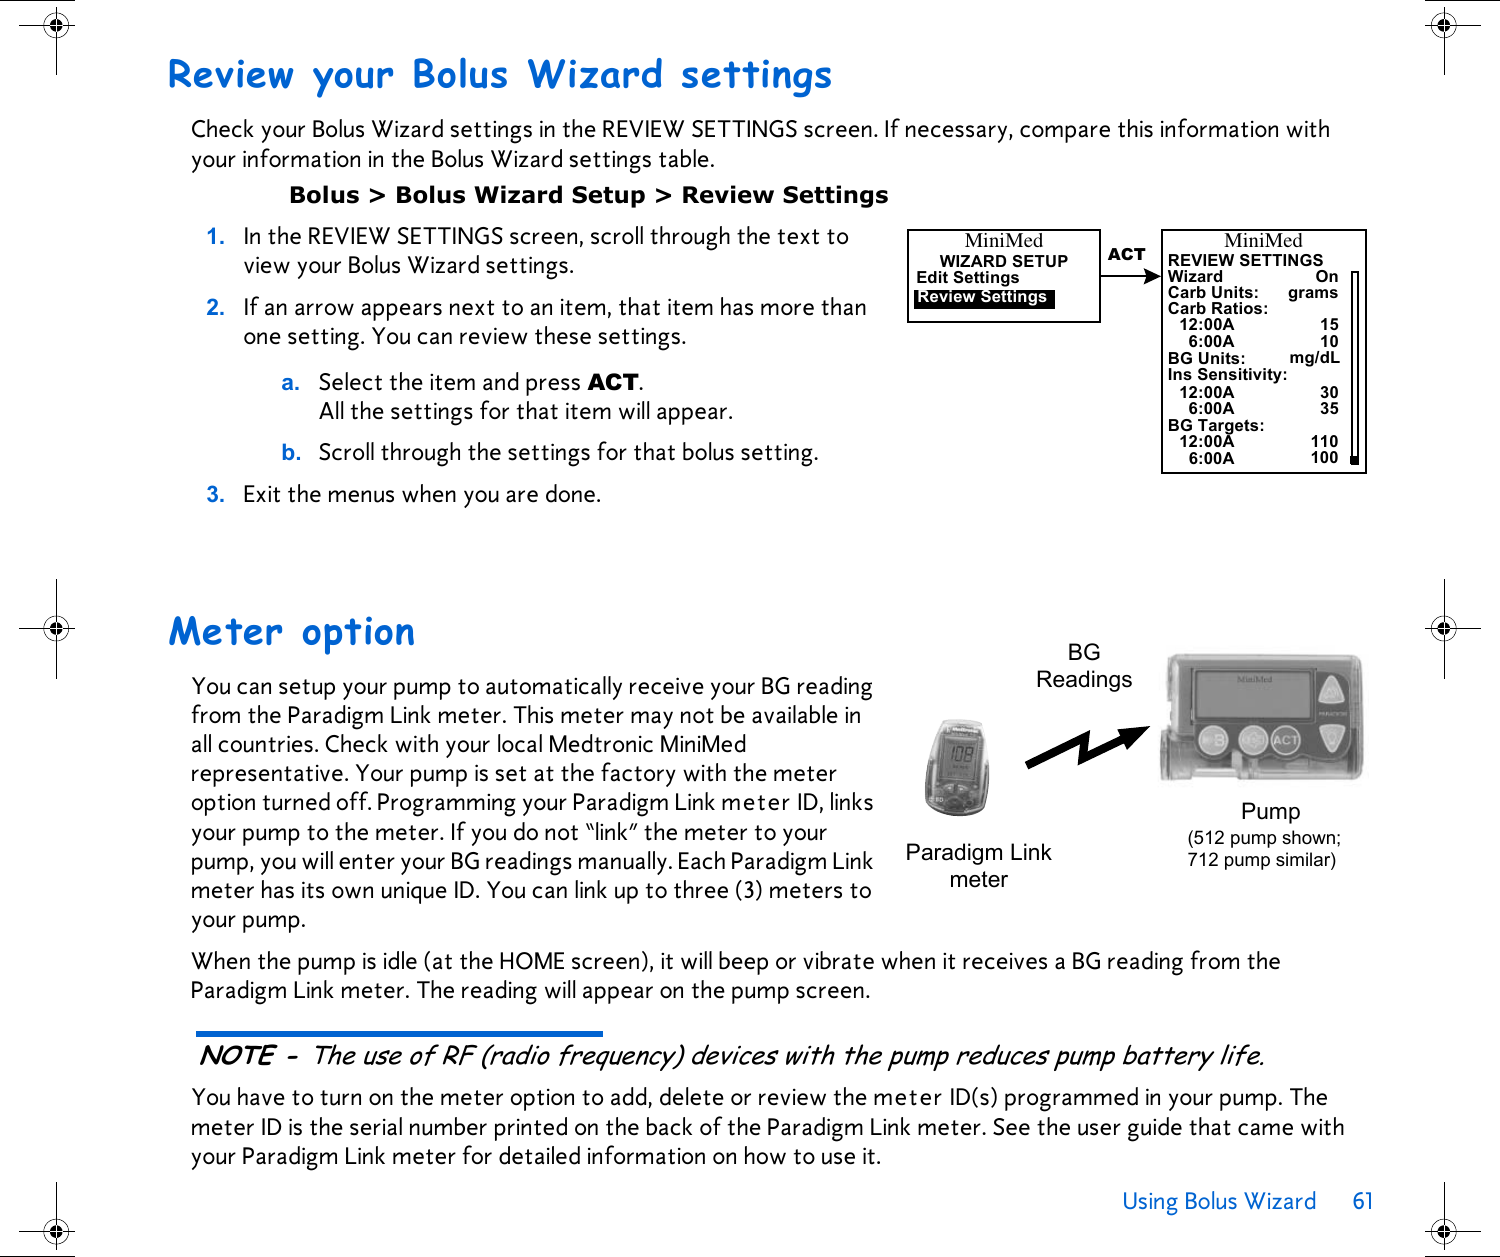 Using Bolus Wizard 61 Review your Bolus Wizard settingsCheck your Bolus Wizard settings in the REVIEW SETTINGS screen. If necessary, compare this information with your information in the Bolus Wizard settings table.Bolus &gt; Bolus Wizard Setup &gt; Review Settings1. In the REVIEW SETTINGS screen, scroll through the text to view your Bolus Wizard settings. 2. If an arrow appears next to an item, that item has more than one setting. You can review these settings. a. Select the item and press ACT. All the settings for that item will appear. b. Scroll through the settings for that bolus setting. 3. Exit the menus when you are done.Meter optionYou can setup your pump to automatically receive your BG reading from the Paradigm Link meter. This meter may not be available in all countries. Check with your local Medtronic MiniMed representative. Your pump is set at the factory with the meter option turned off. Programming your Paradigm Link meter ID, links your pump to the meter. If you do not “link” the meter to your pump, you will enter your BG readings manually. Each Paradigm Link meter has its own unique ID. You can link up to three (3) meters to your pump.When the pump is idle (at the HOME screen), it will beep or vibrate when it receives a BG reading from the Paradigm Link meter. The reading will appear on the pump screen. NOTE - The use of RF (radio frequency) devices with the pump reduces pump battery life.You have to turn on the meter option to add, delete or review the meter ID(s) programmed in your pump. The meter ID is the serial number printed on the back of the Paradigm Link meter. See the user guide that came with your Paradigm Link meter for detailed information on how to use it.Carb Units:WizardREVIEW SETTINGSOnCarb Ratios:gramsMiniMed12:00A 156:00A 10BG Units: mg/dLIns Sensitivity:12:00A 306:00A 35BG Targets:12:00A 1106:00A 100ACTMiniMedWIZARD SETUPEdit SettingsReview SettingsBGReadingsPump(512 pump shown; 712 pump similar)Paradigm Linkmeter